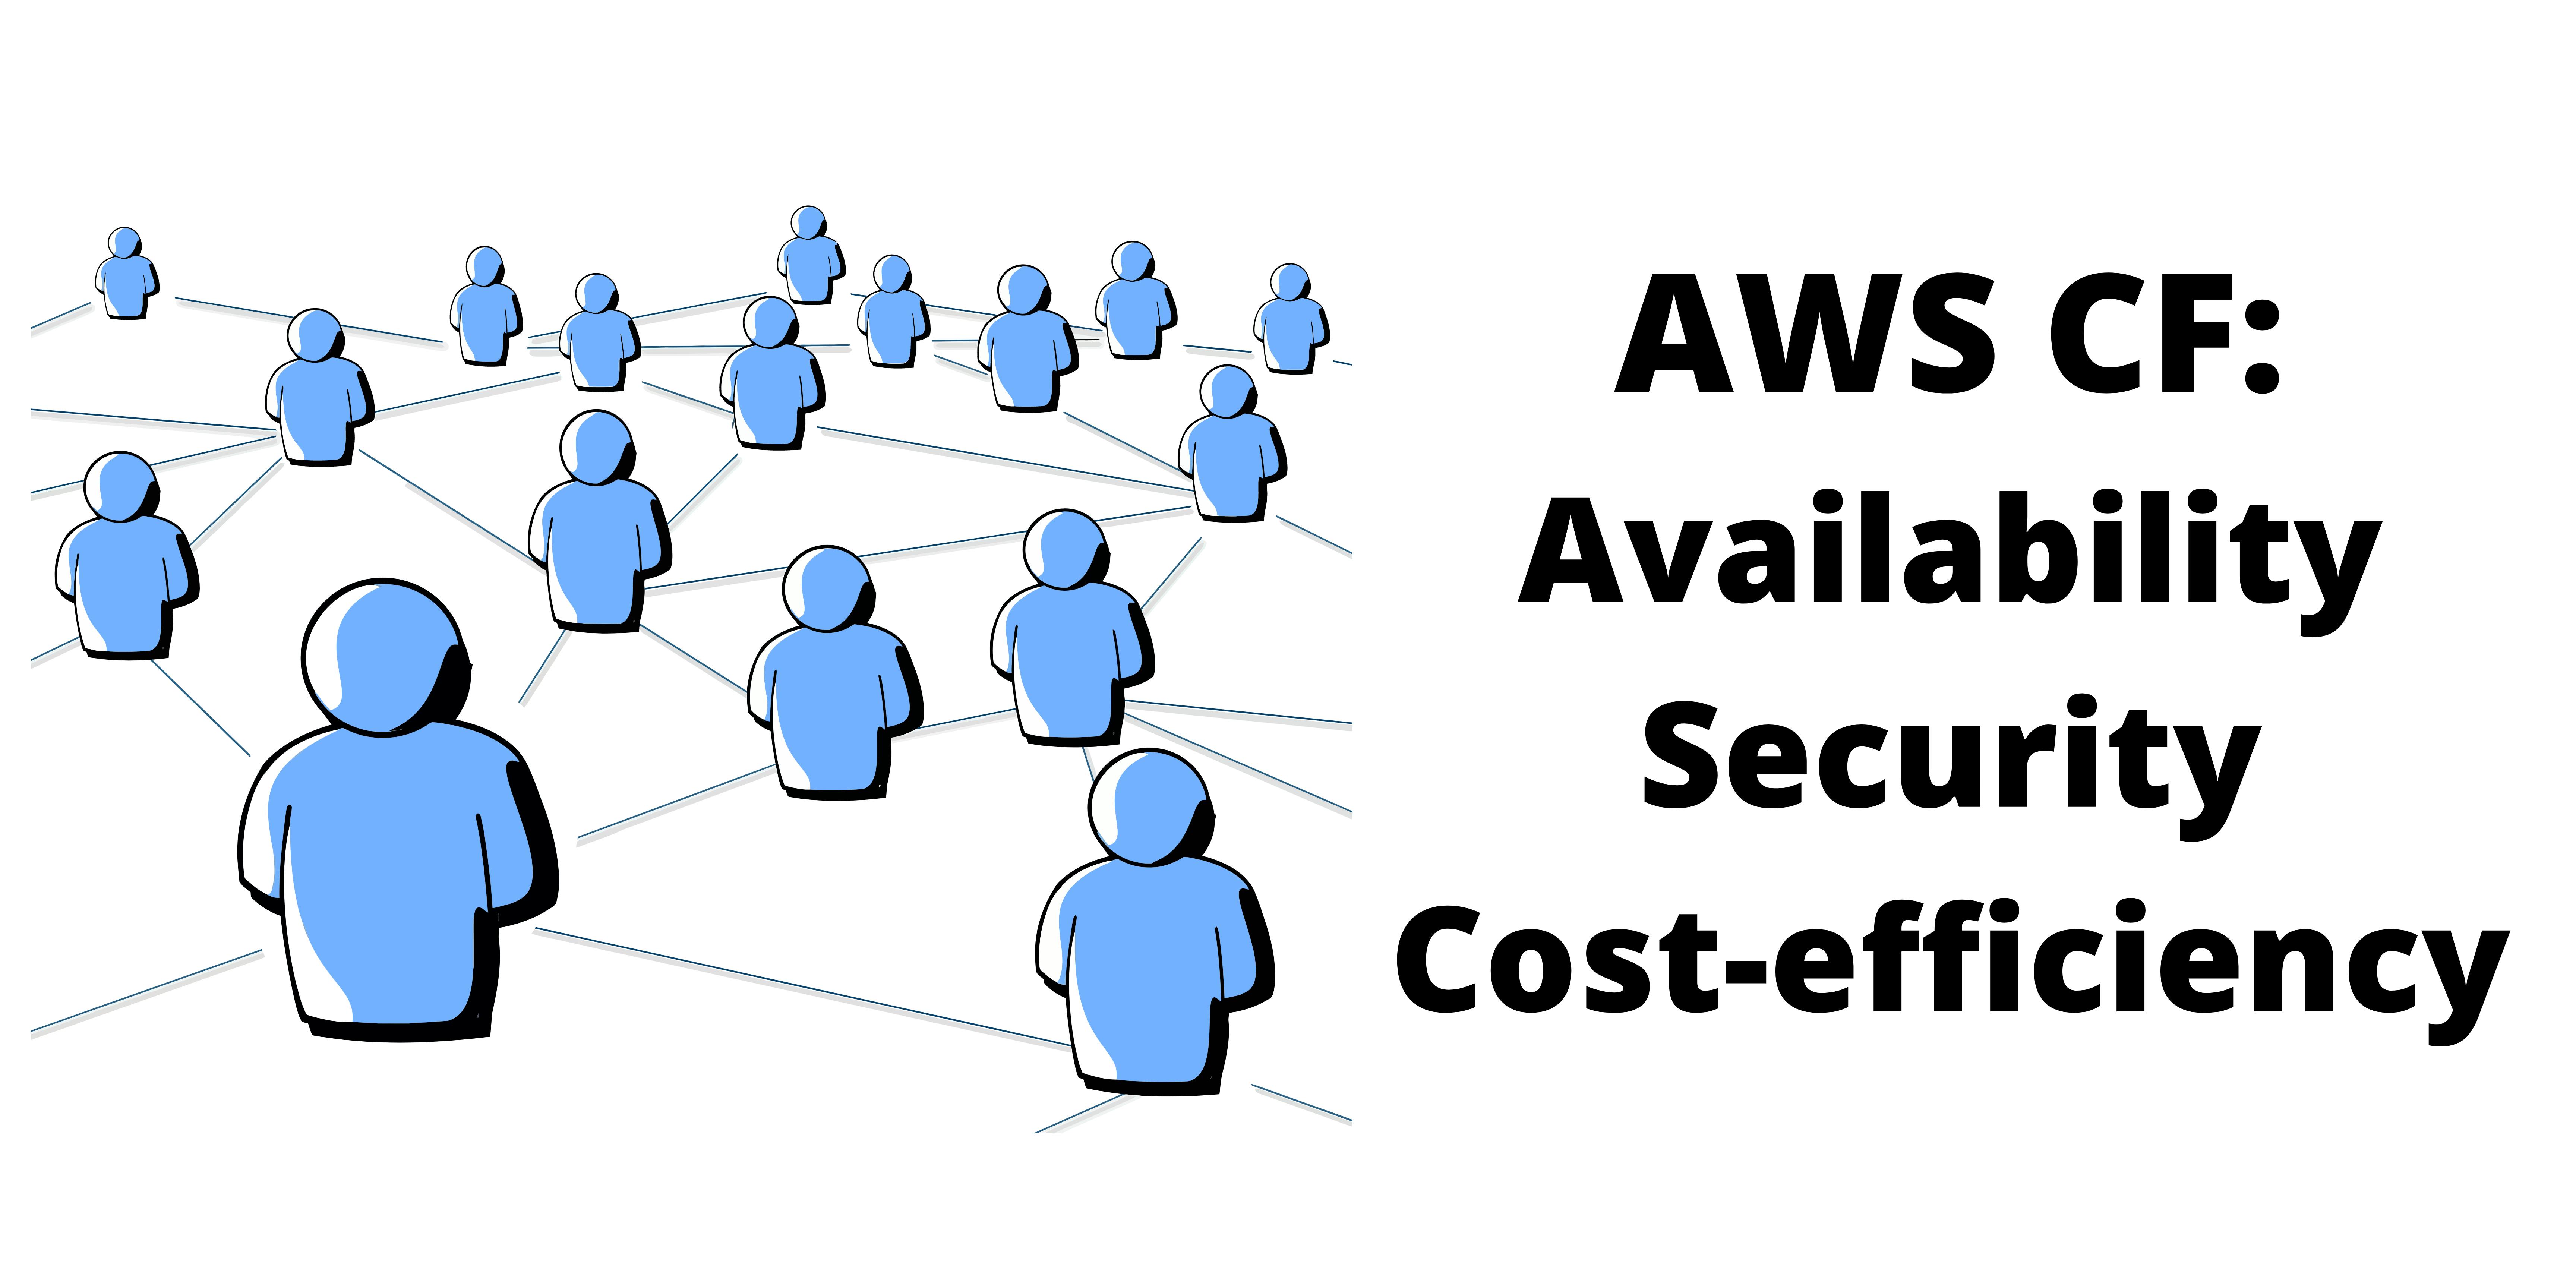 AWS CF Availability Security Cost-efficiency.png